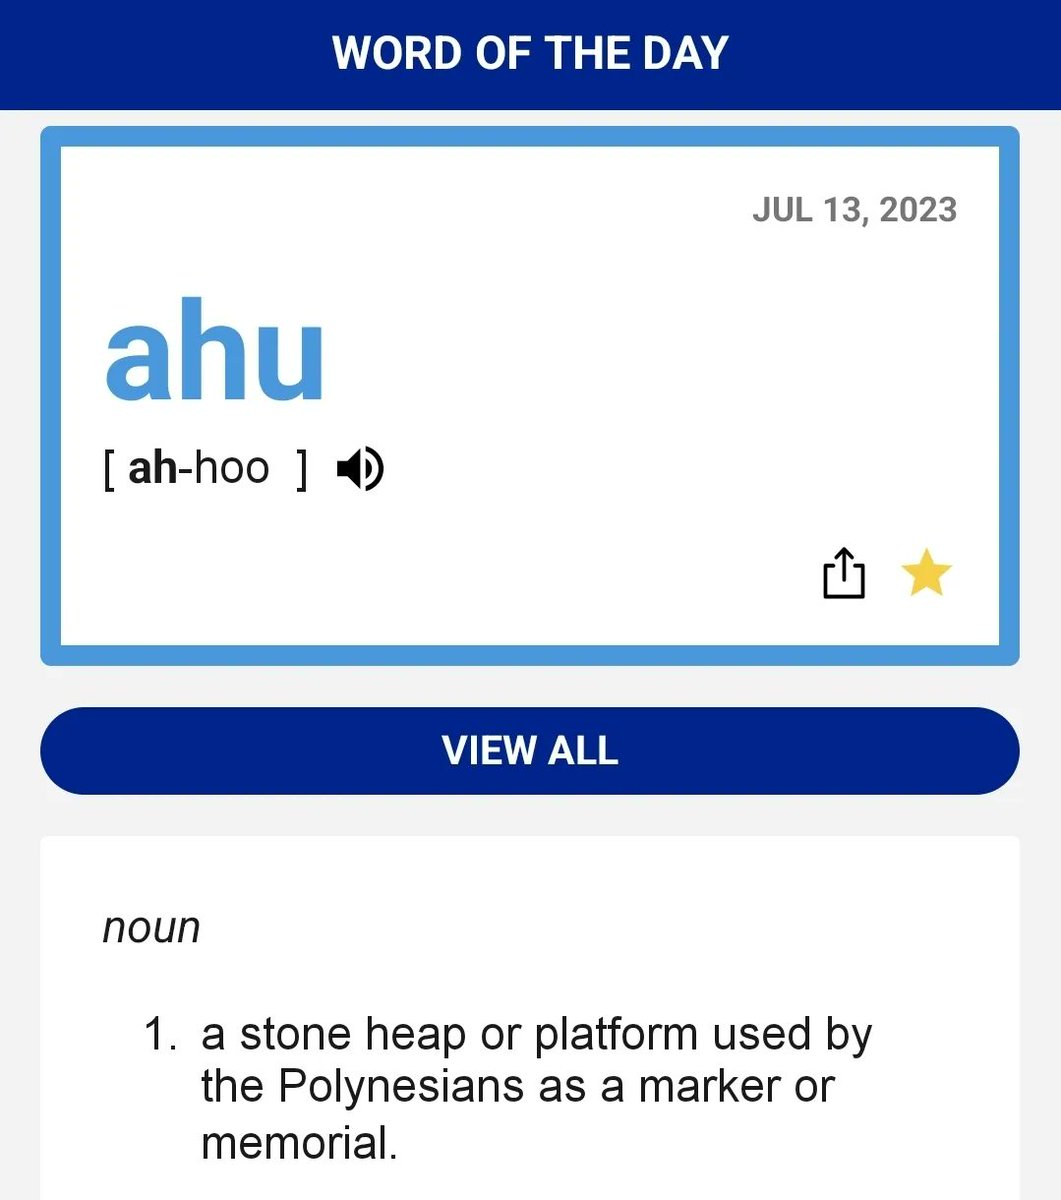 Definition of: 'ahu' is: 'a stone heap or platform used by the Polynesians as a marker or memorial.'. Learn more at: 'https://t.co/WXz2l9epgN' https://t.co/6oeWVIVGgY